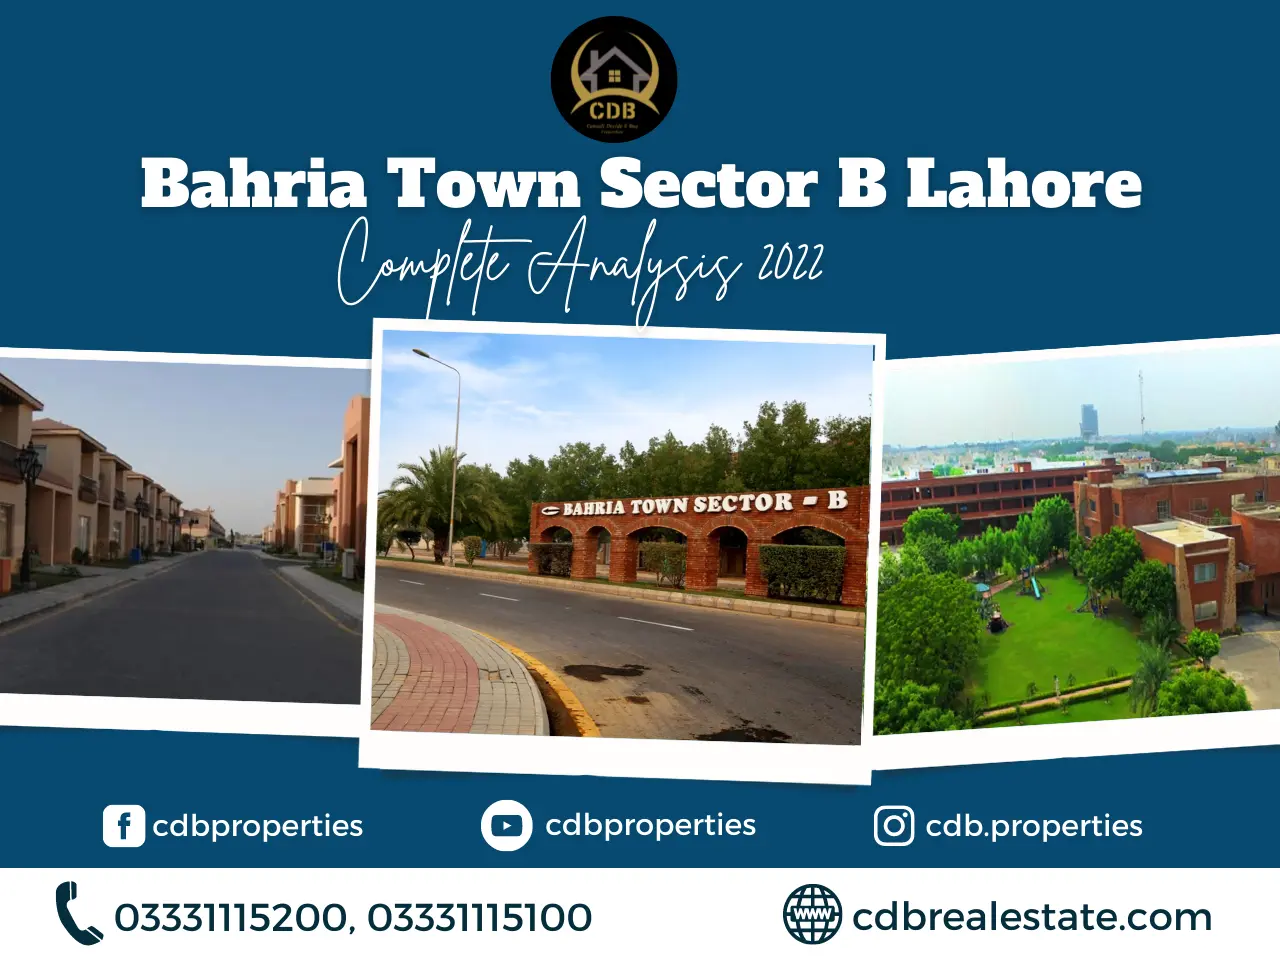 Bahria Town Sector B Lahore